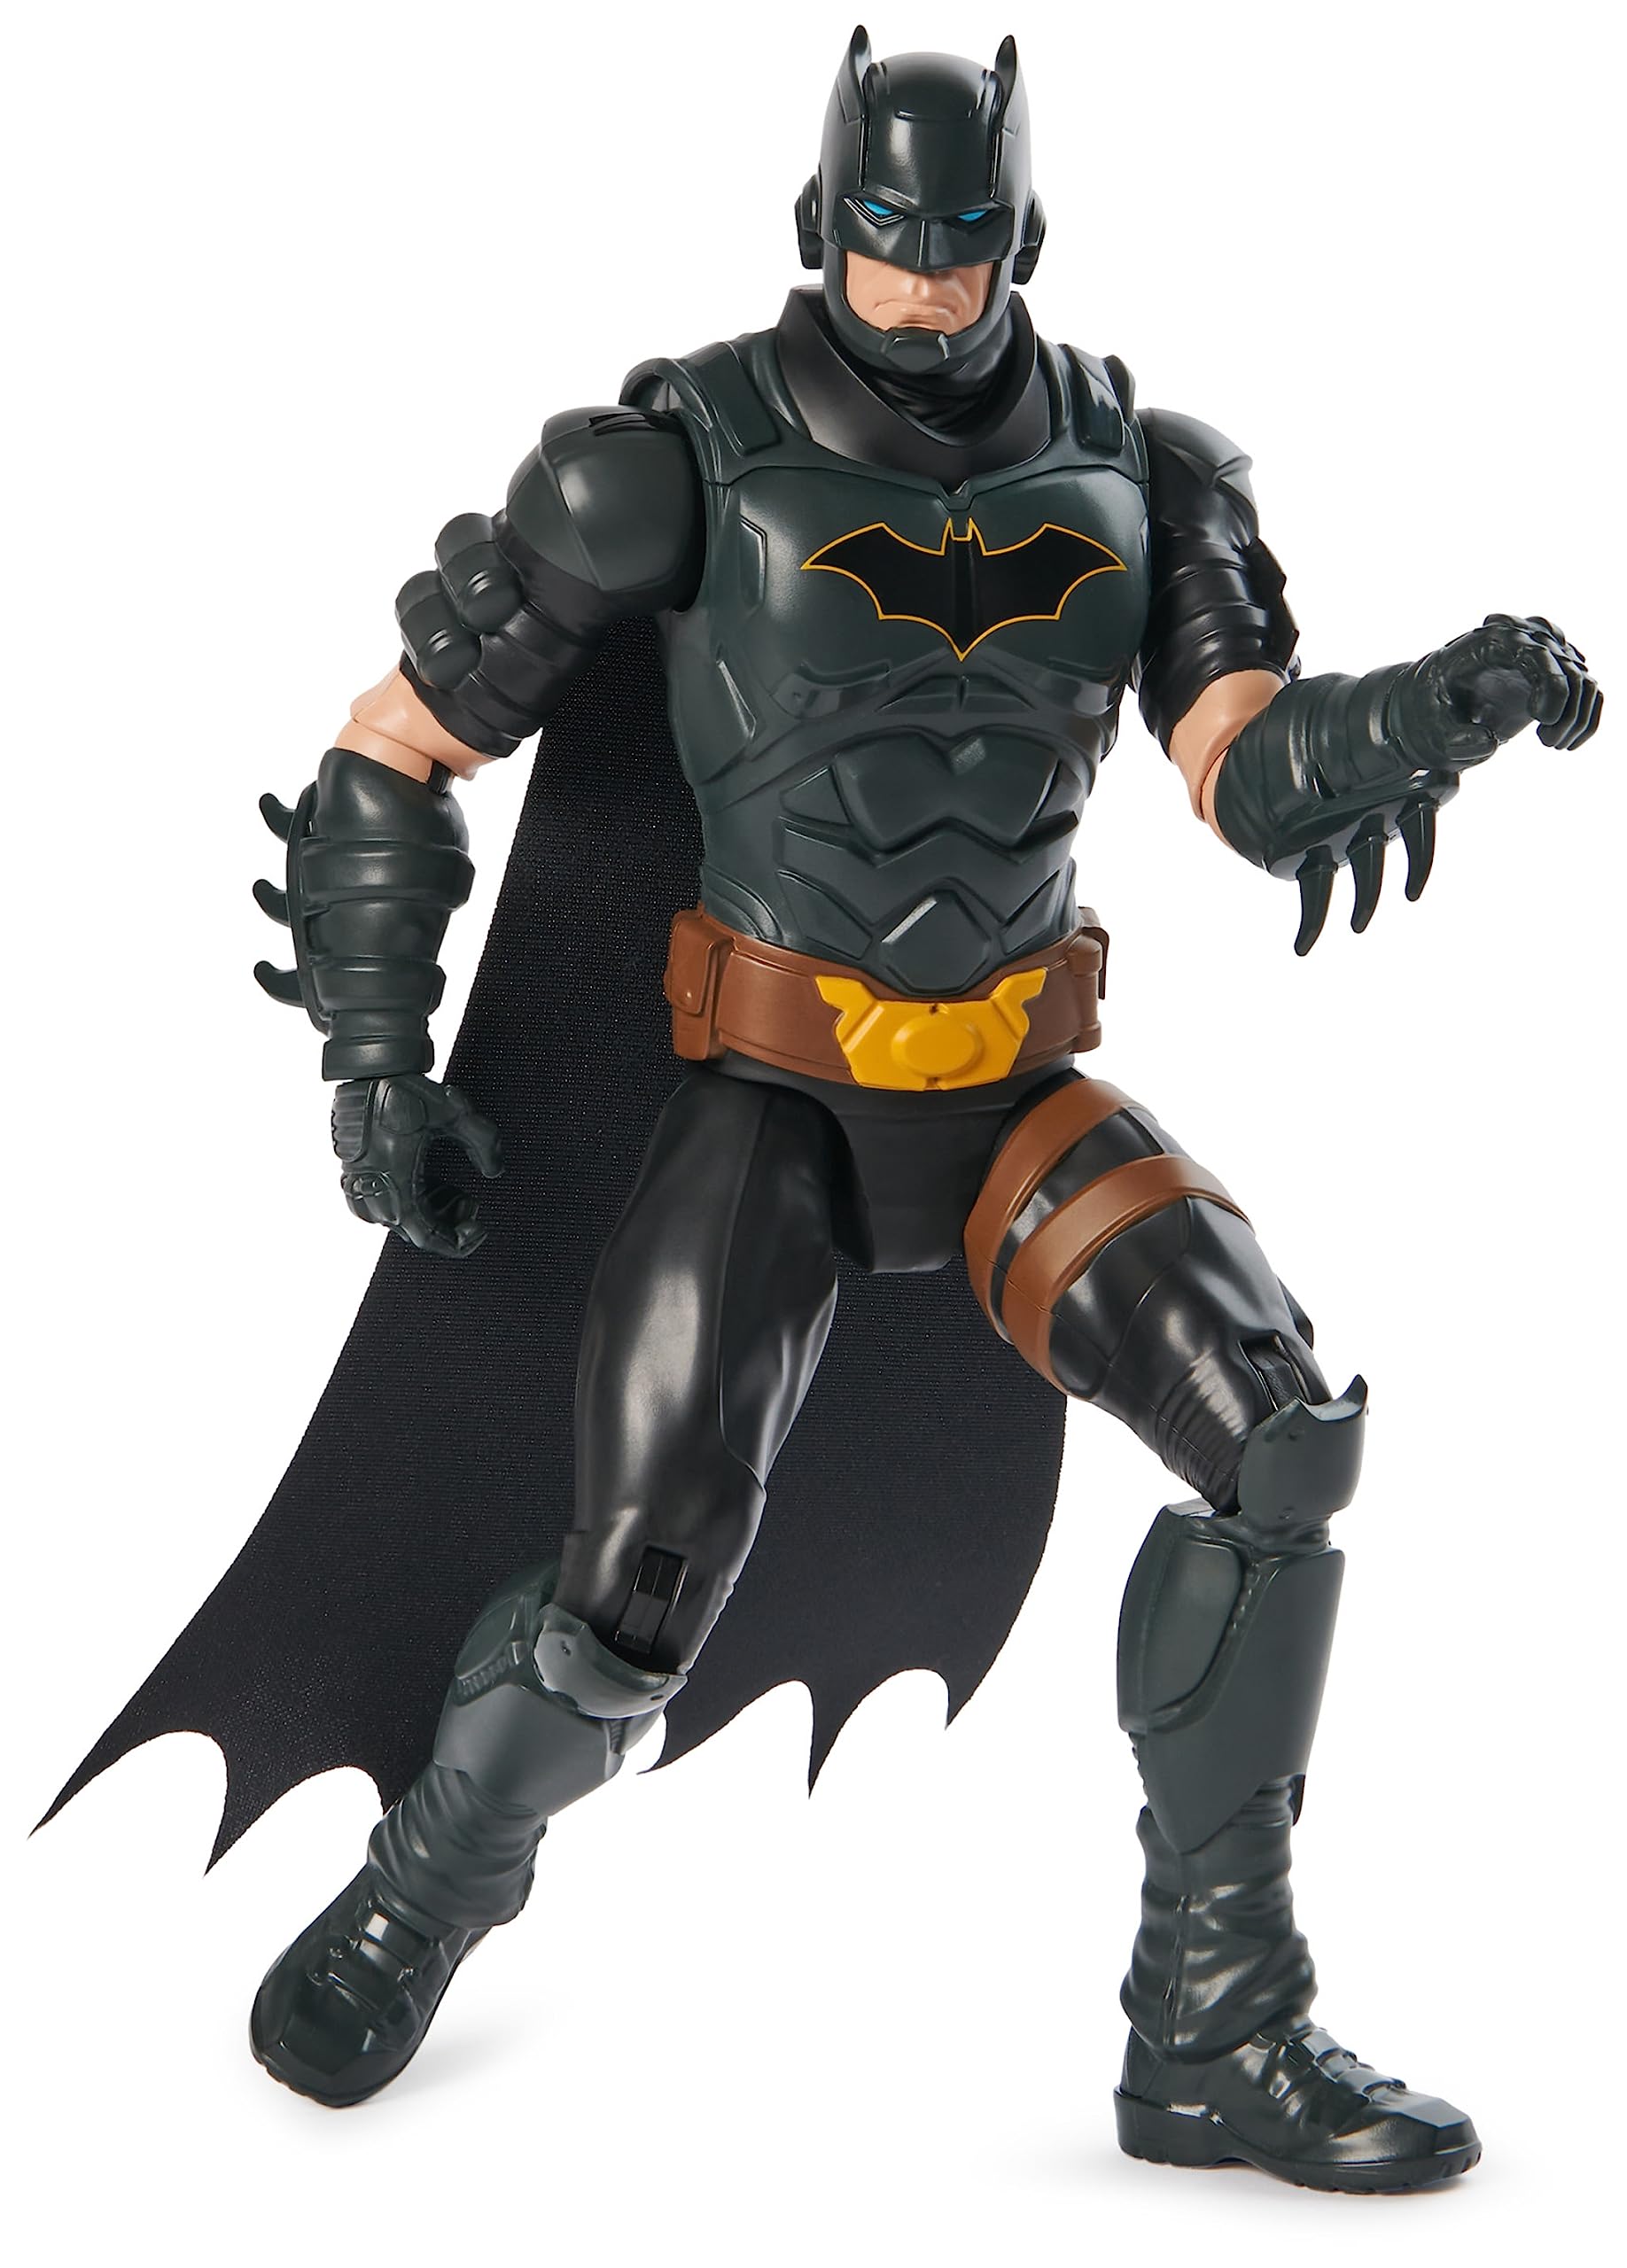 12" DC Comics Batman Action Figure $5.80 + Free Shipping w/ Prime or on orders over $35